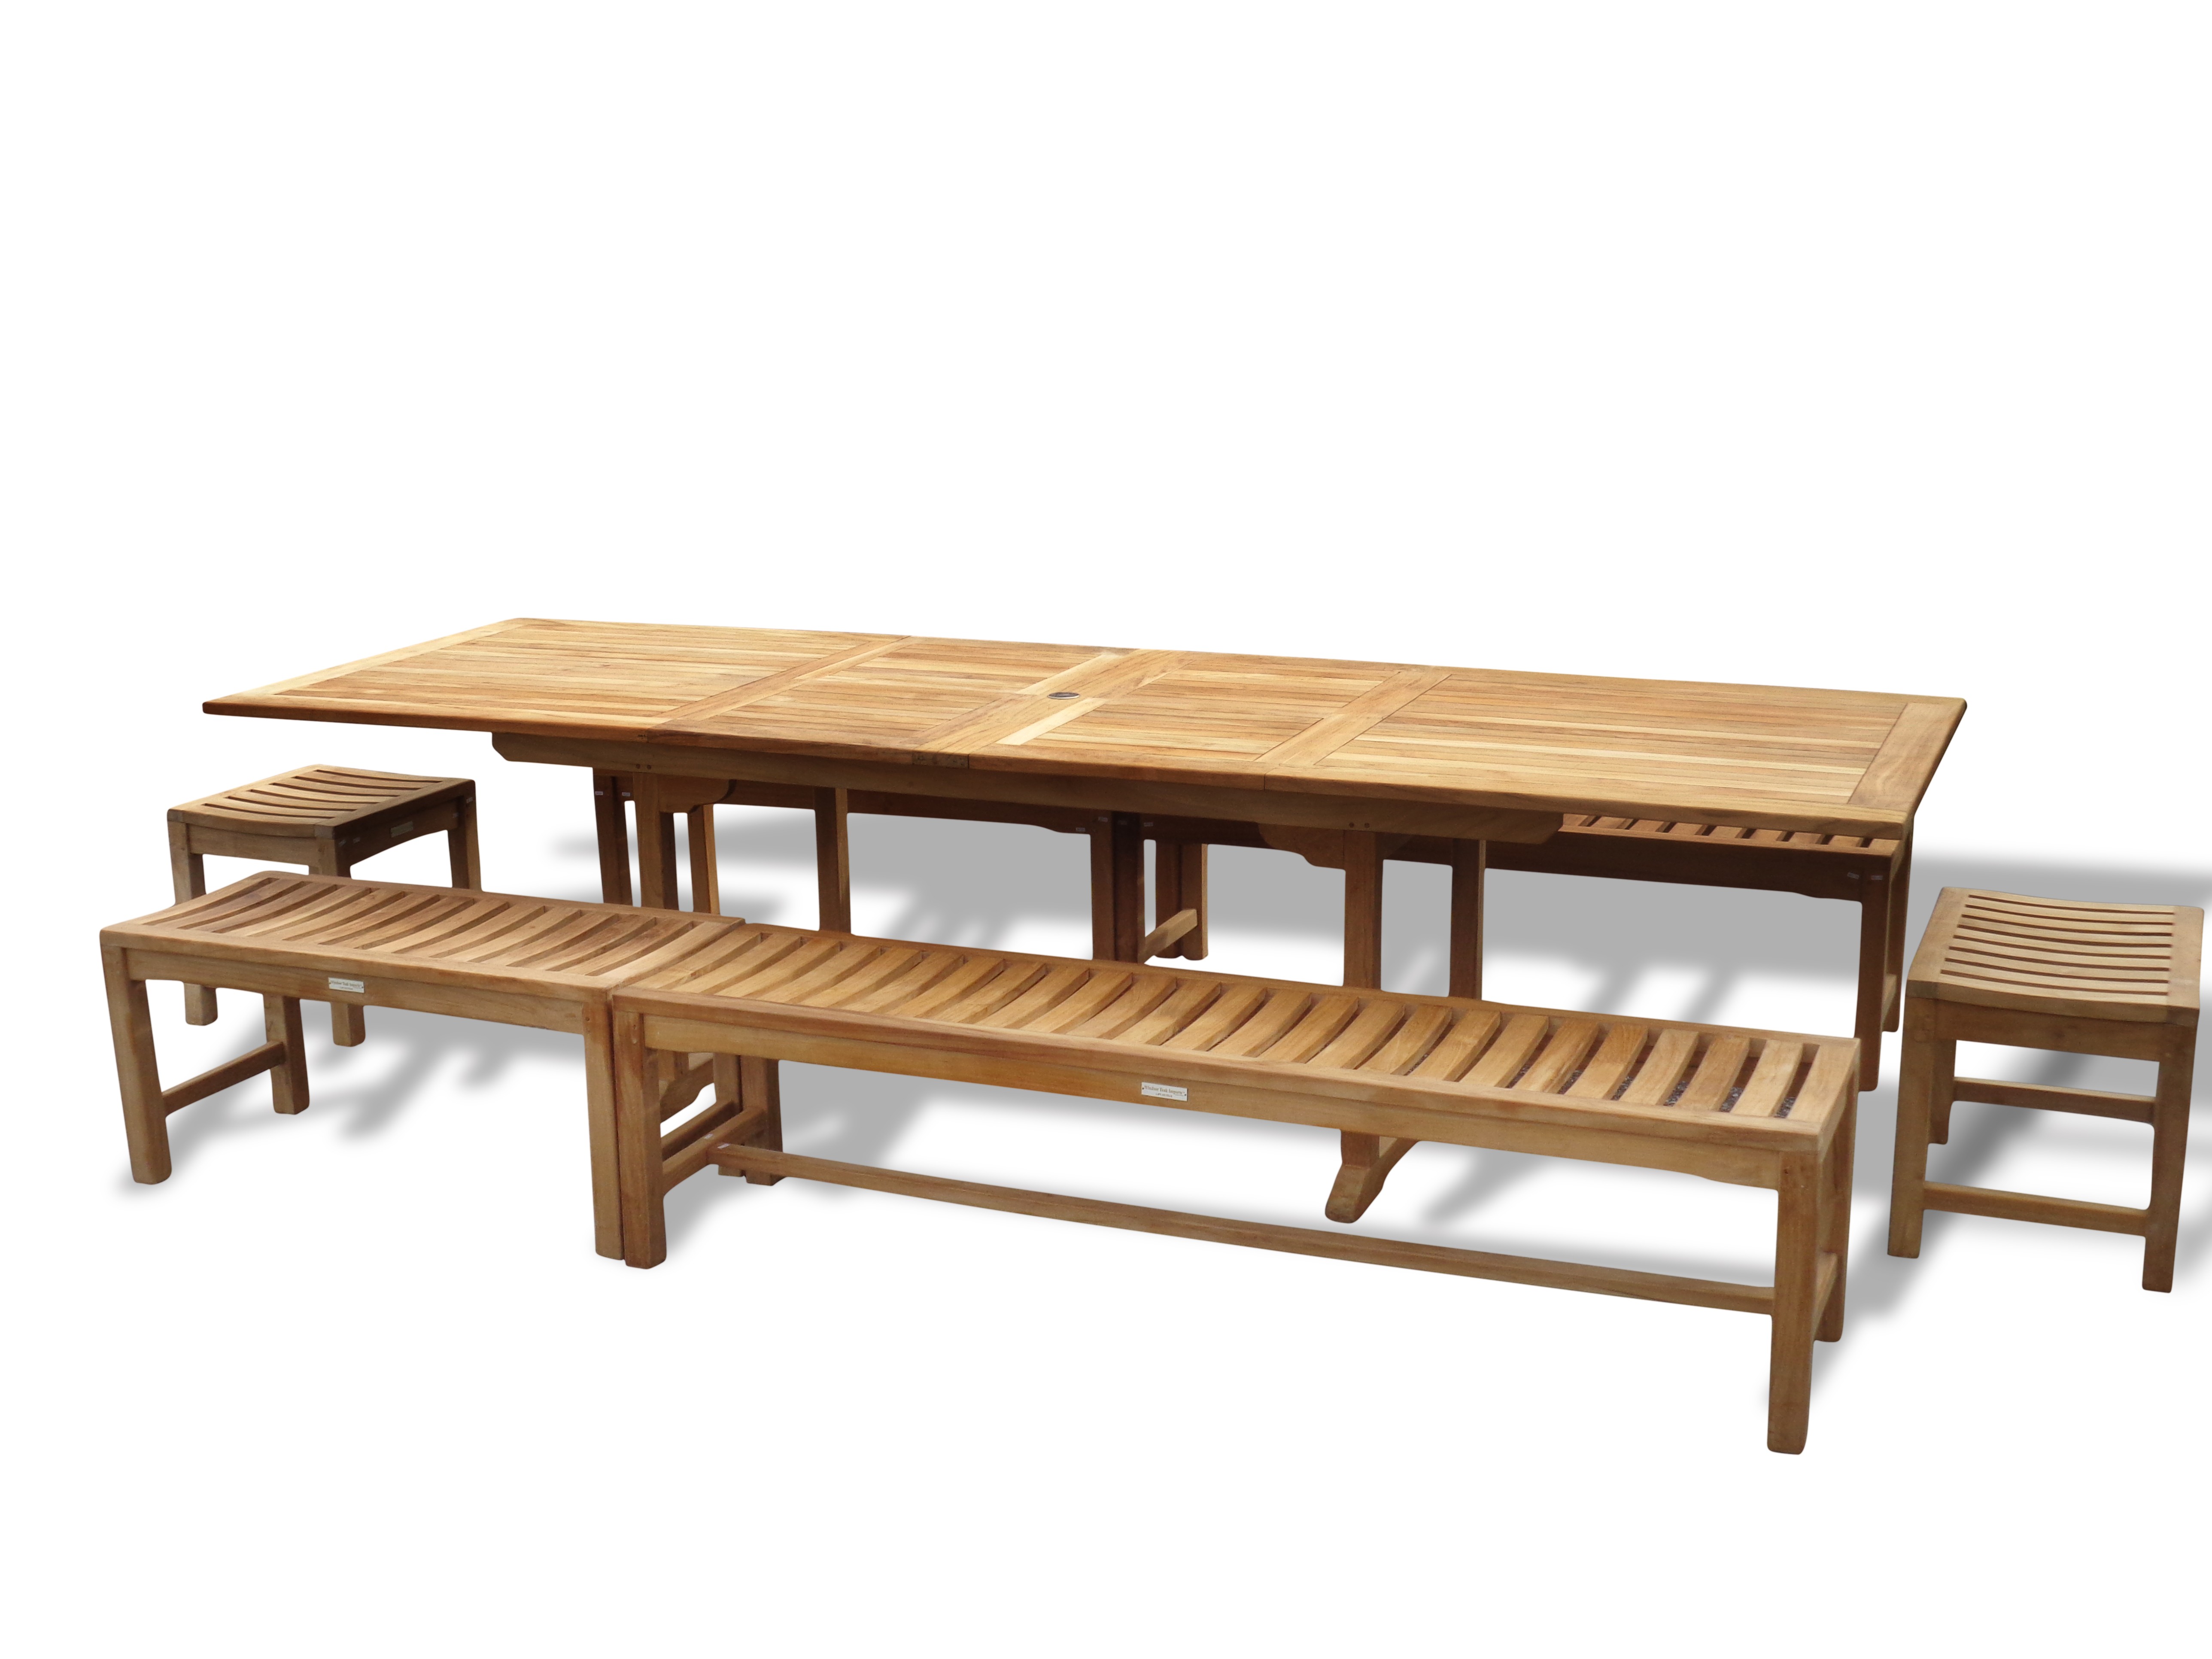 Buckingham Grade A Teak 118" x 39" Double Leaf Rectangular Extension Table w/6 Backless Benches...Seats 14 Adults